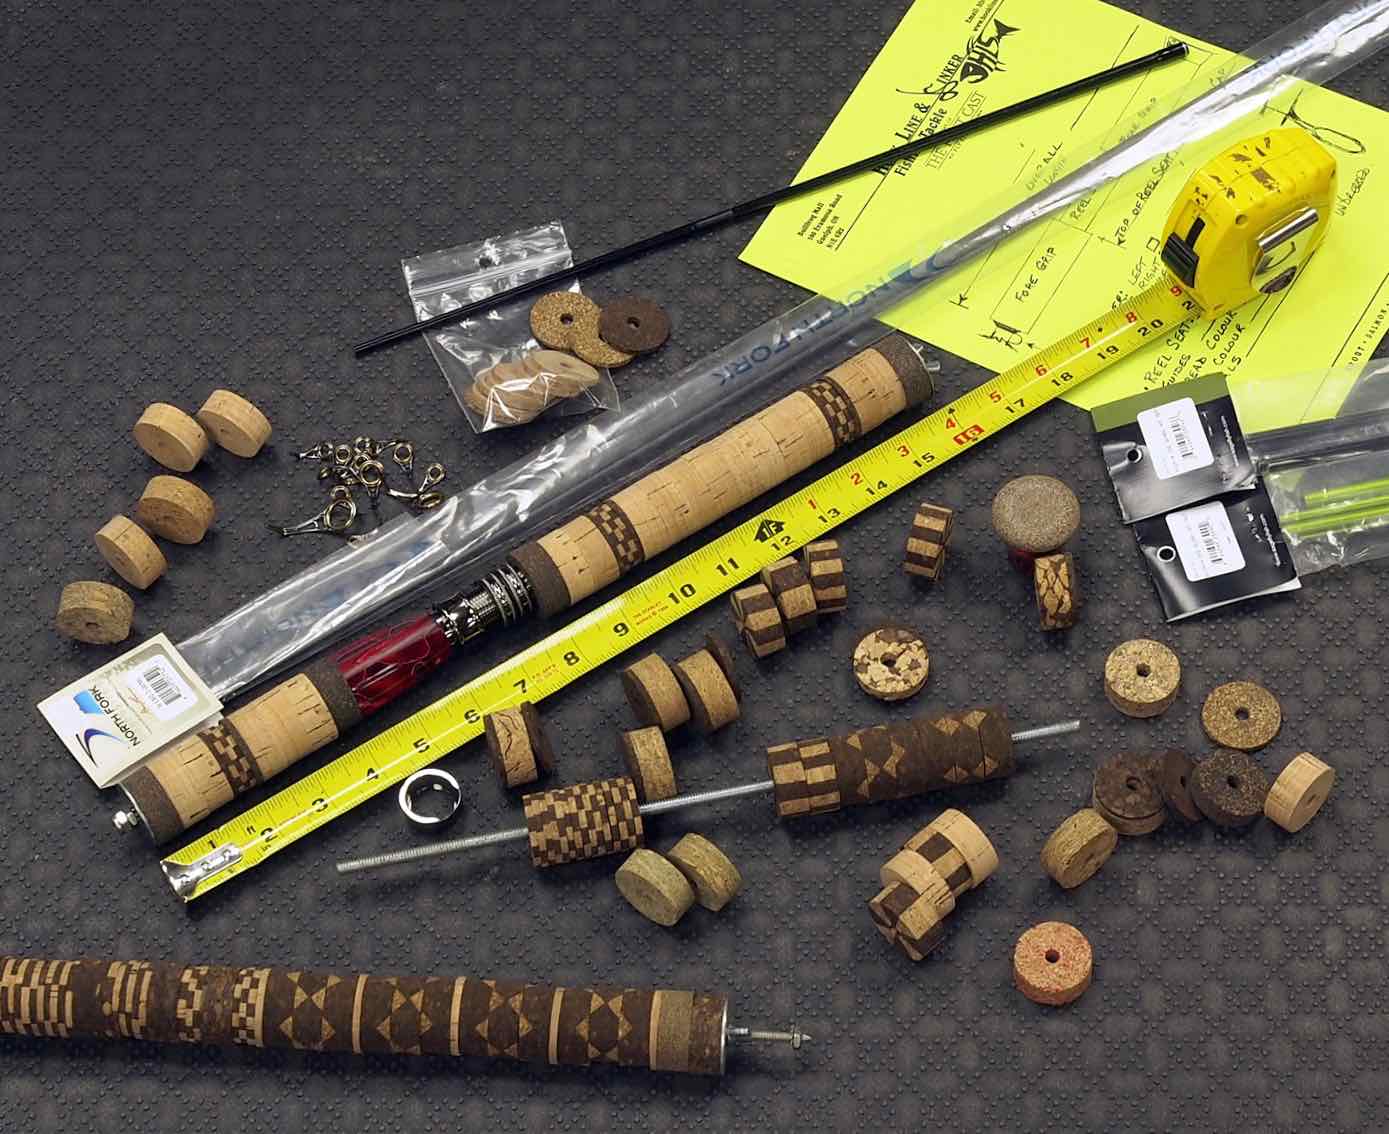 Custom Fishing Rods - Rod Building Supplies - Rod Building - The